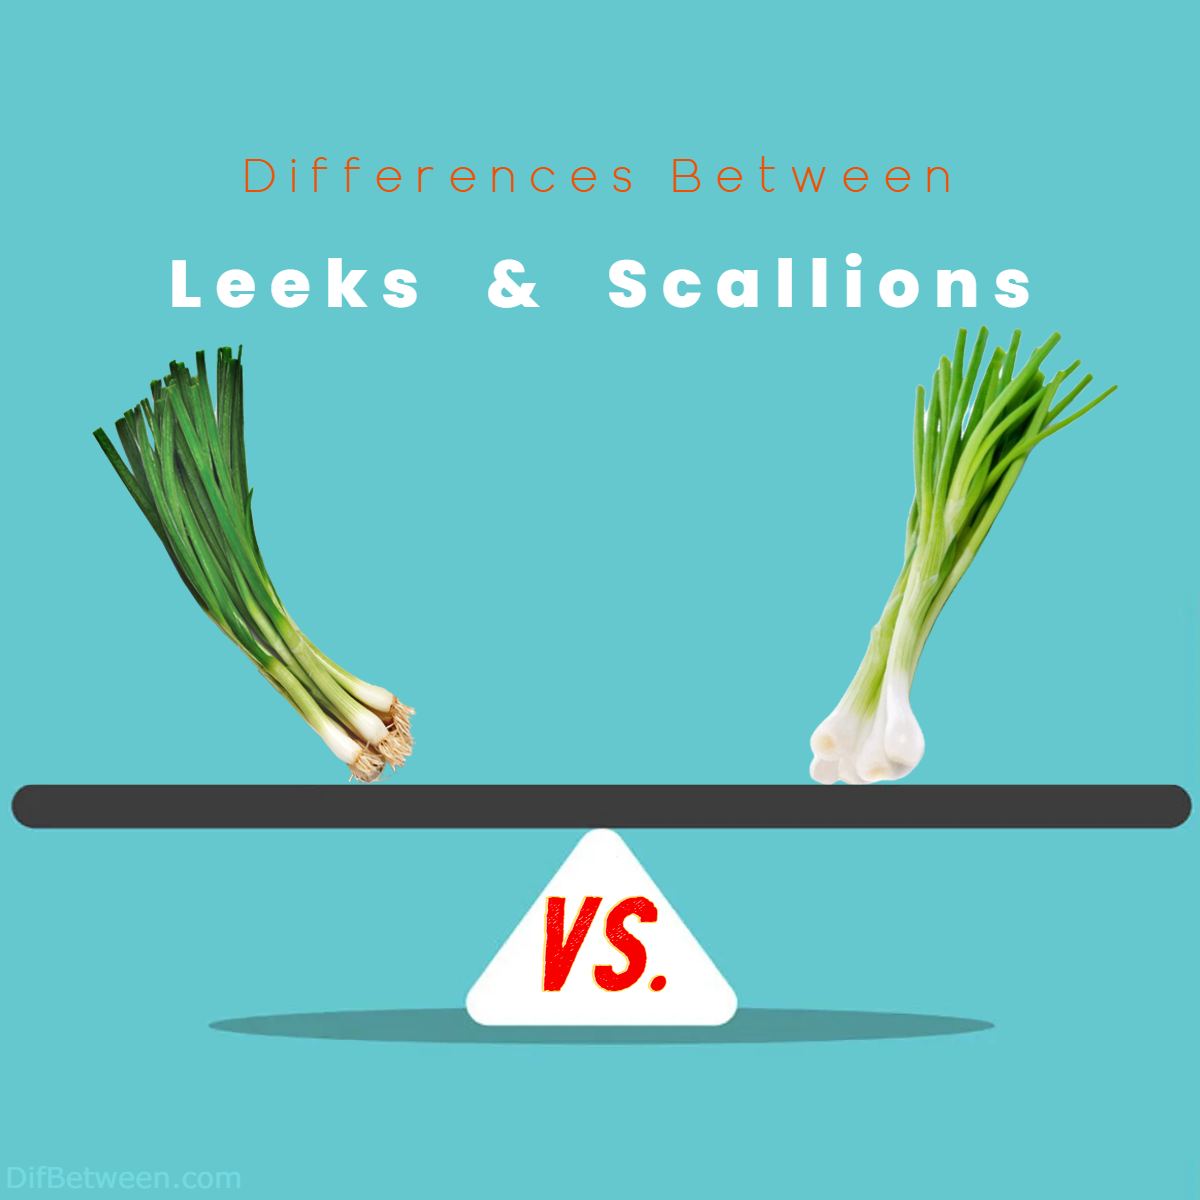 Difference Between Leeks and Scallions